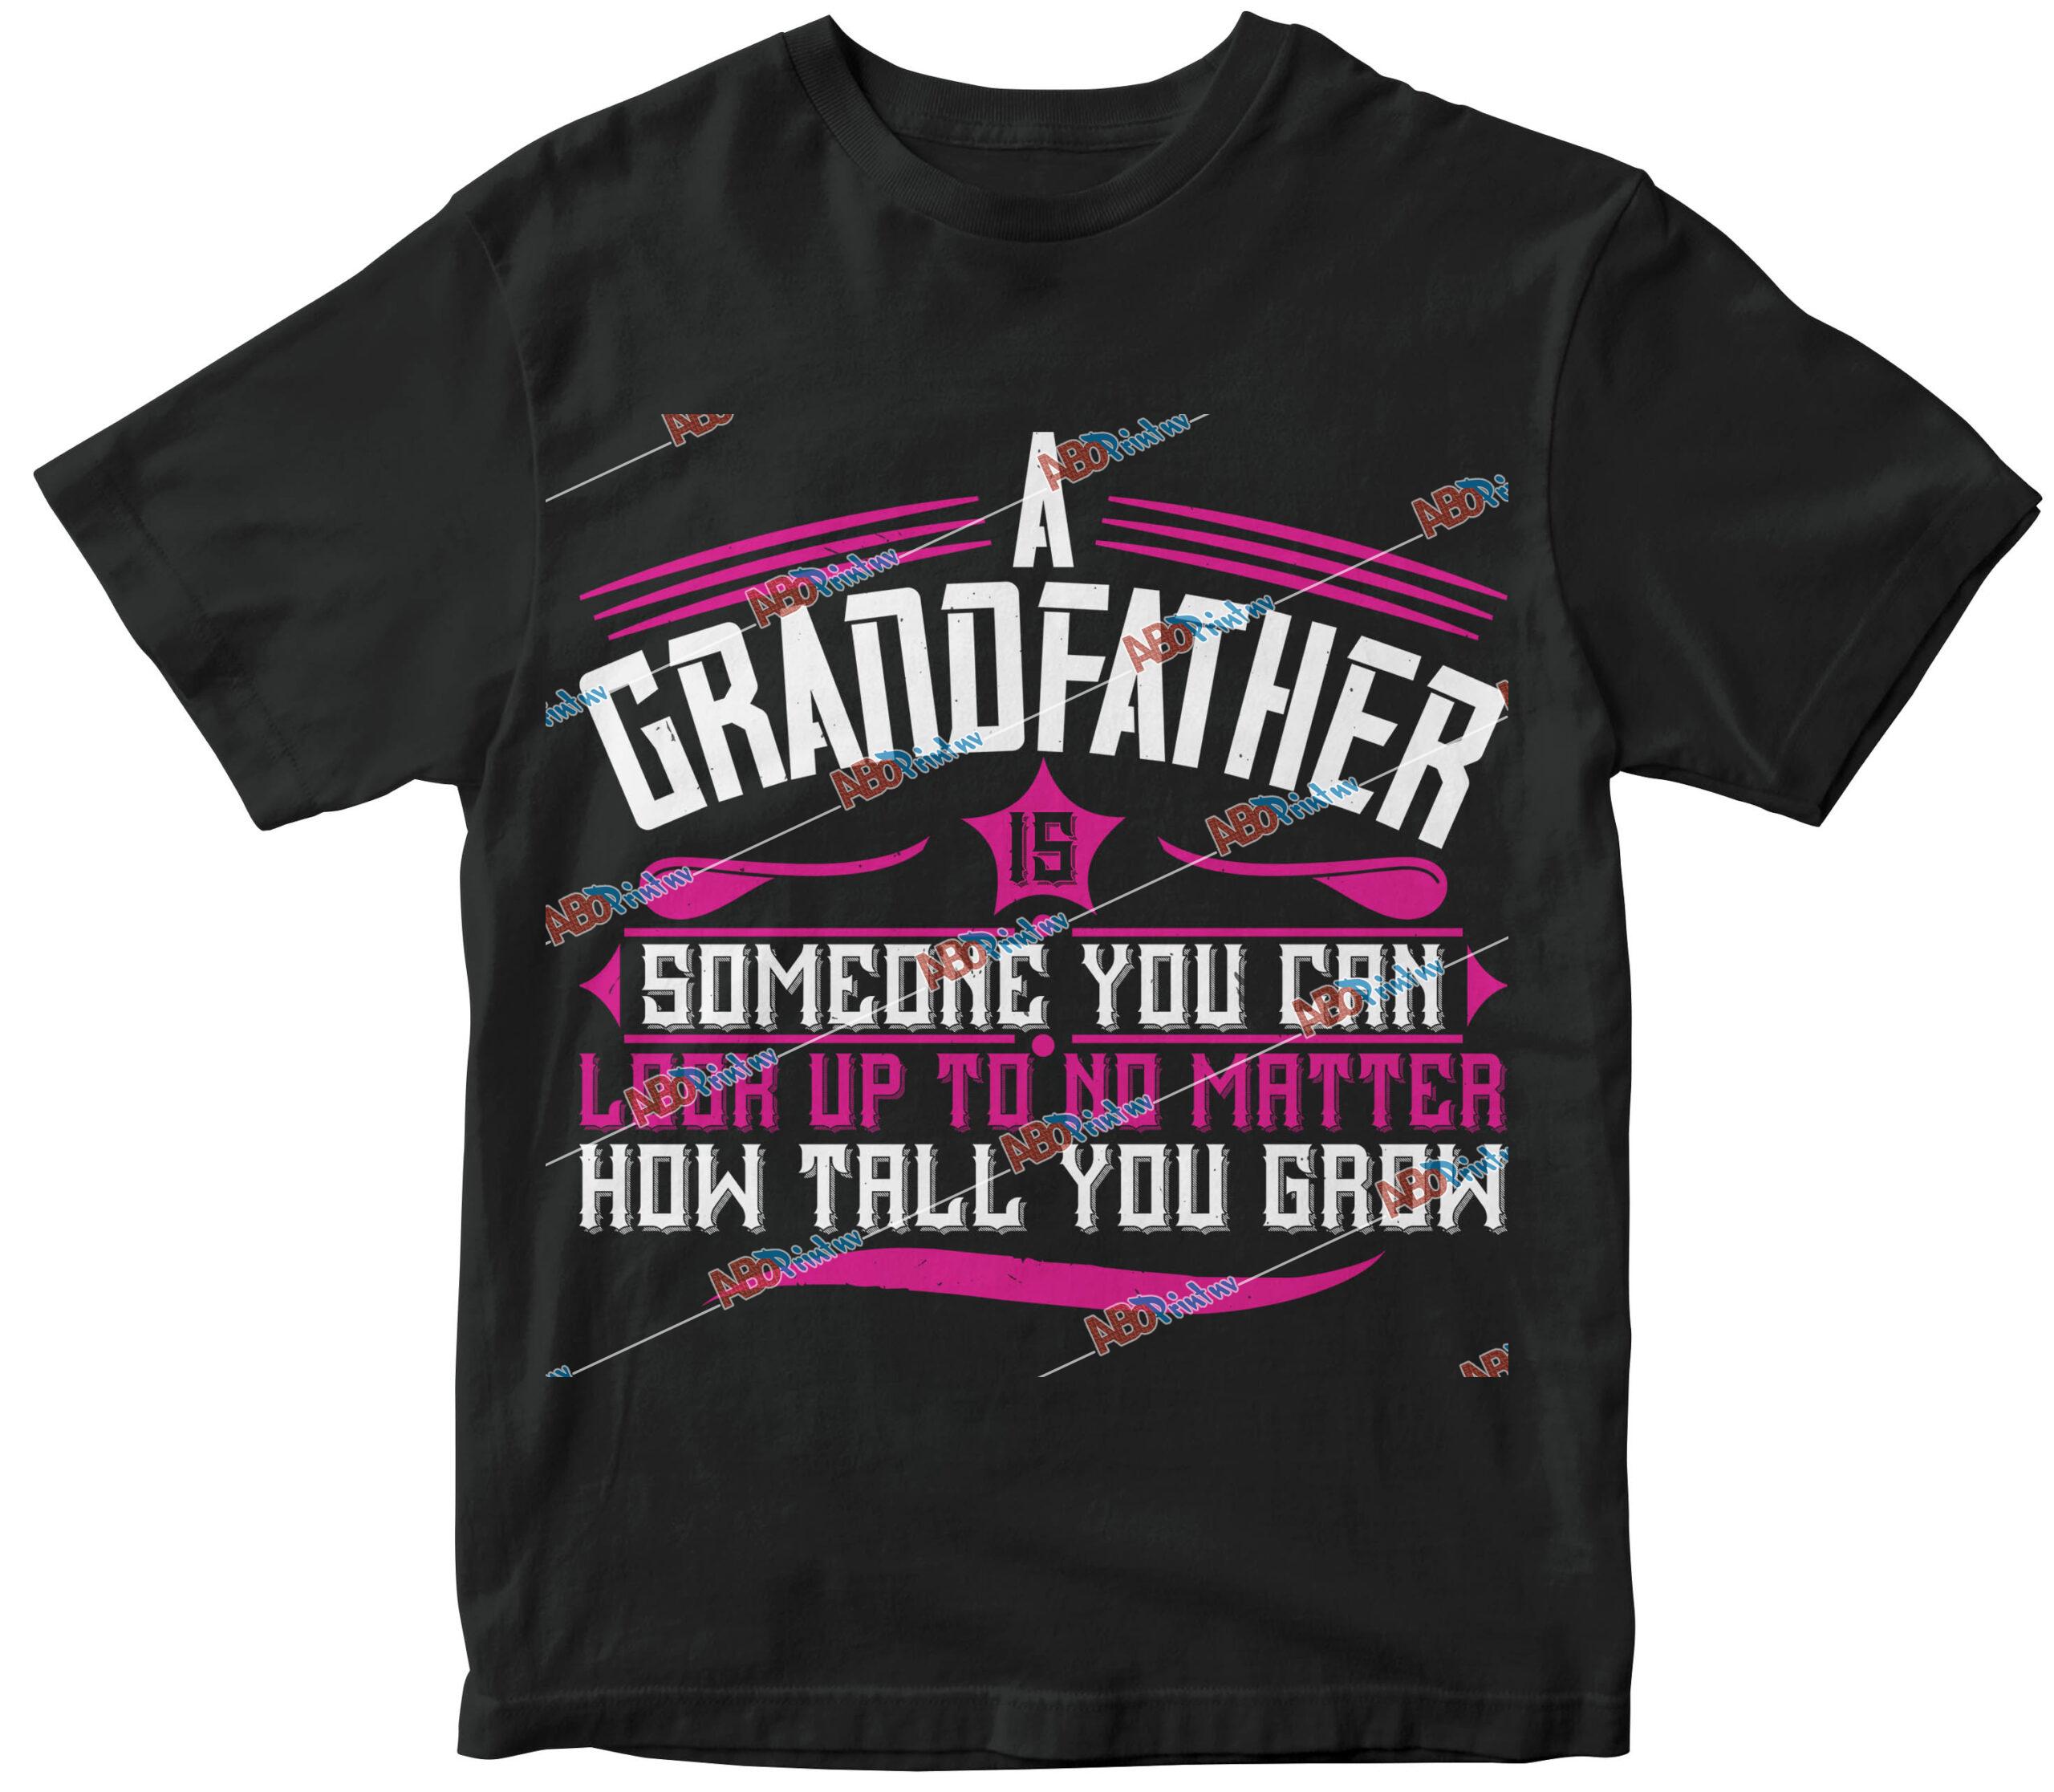 A grandfather is someone you can look up to-01.jpg